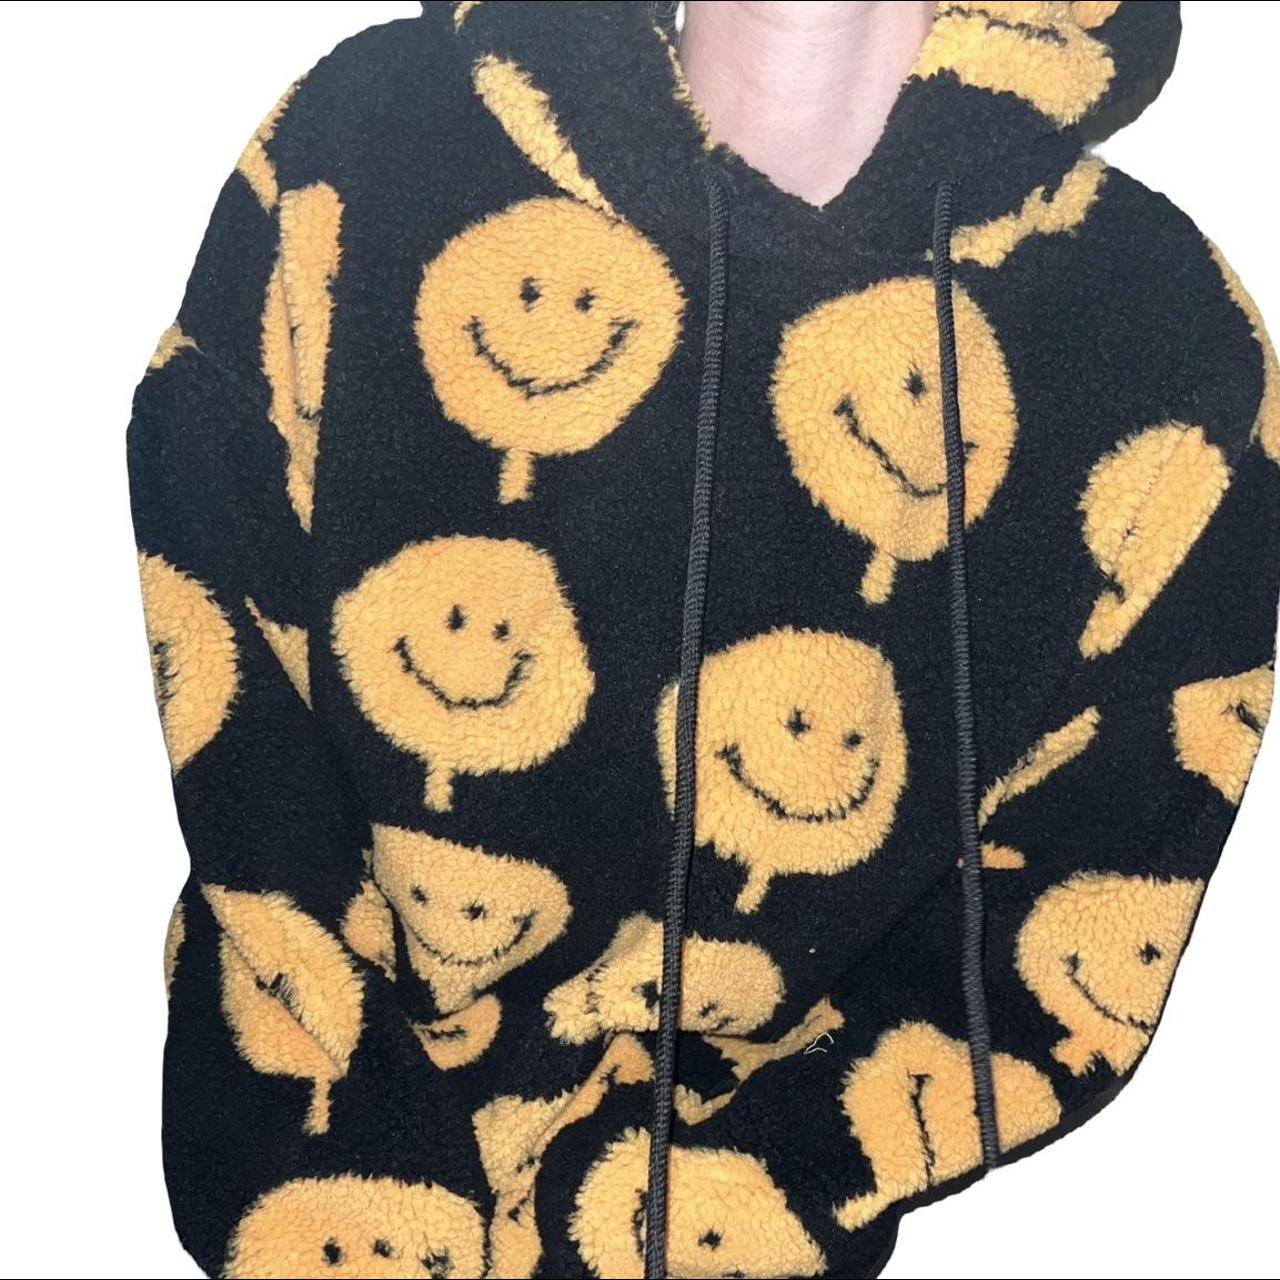 Trippy smiley face hoodie super fleecy ONLY ONE ON... - Depop